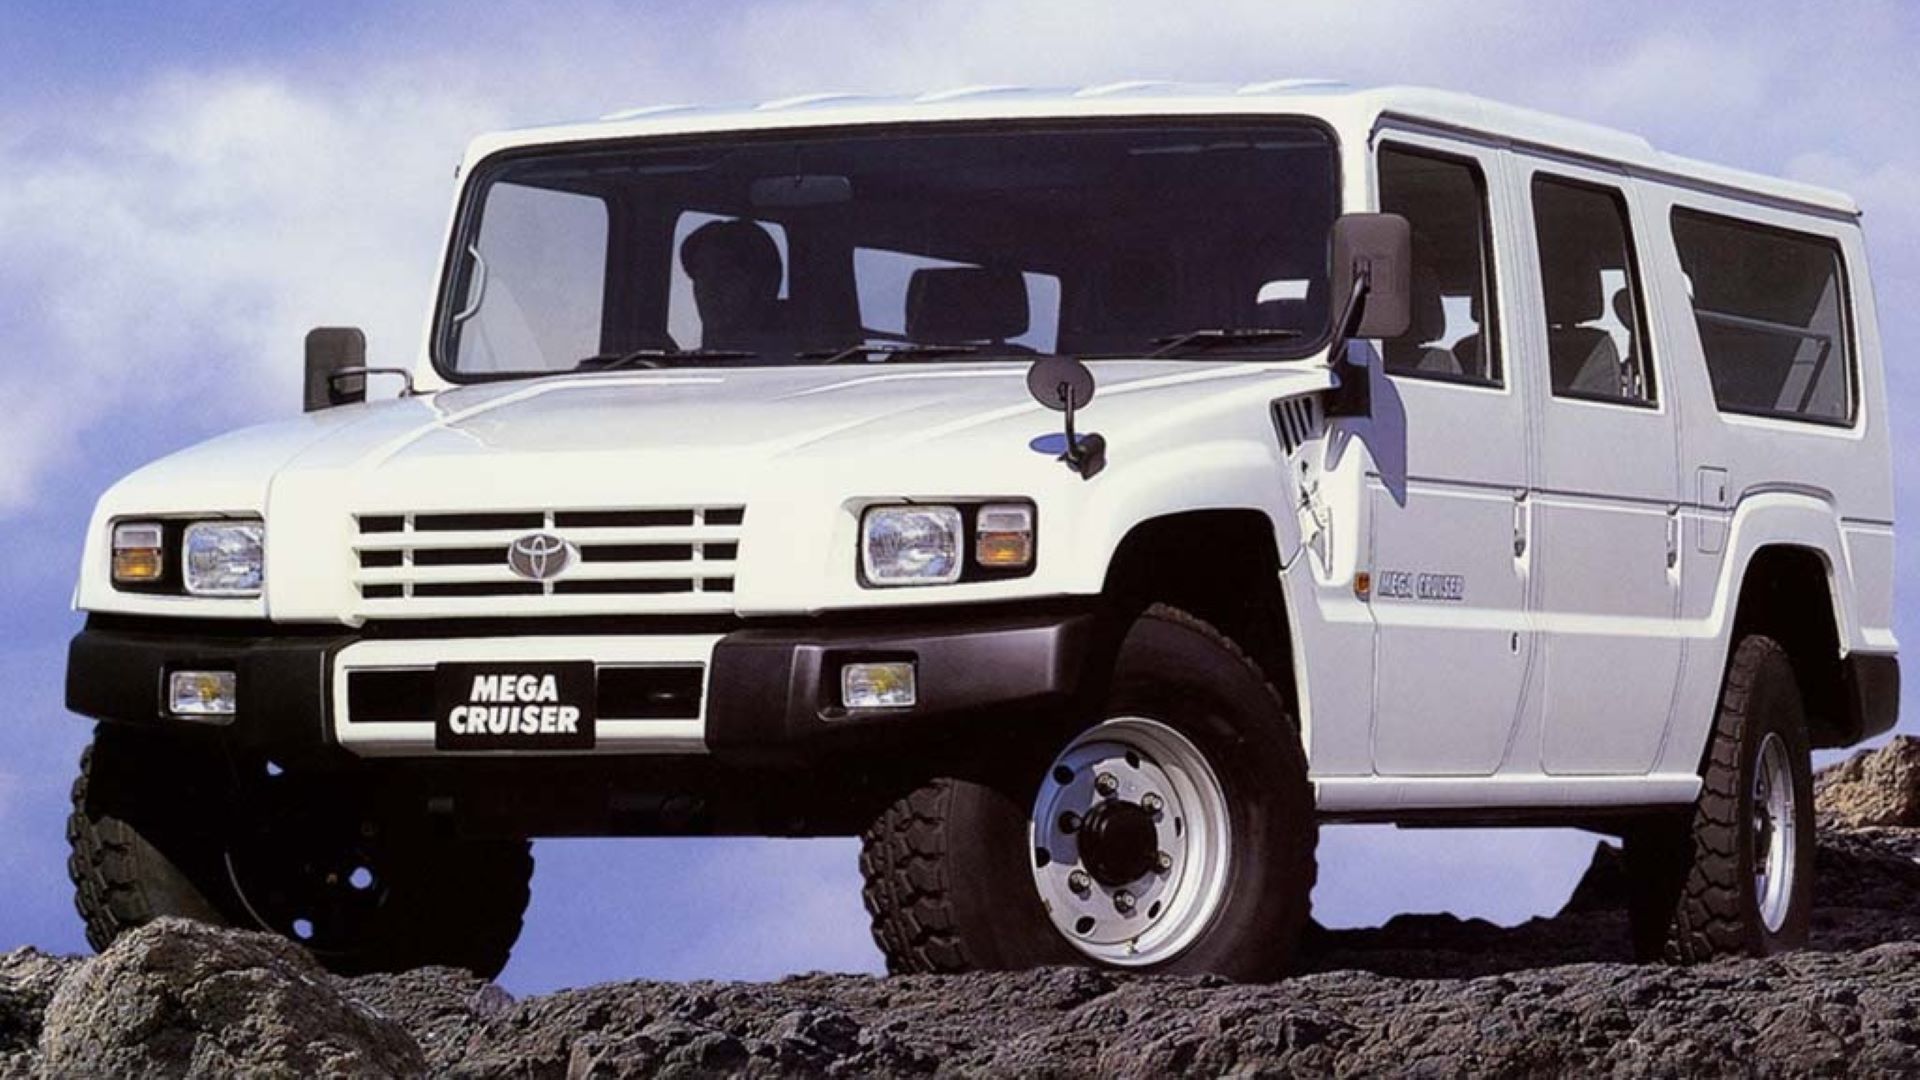 Front 3/4 shot of a white Toyota Mega Cruiser parked on rugged terrain